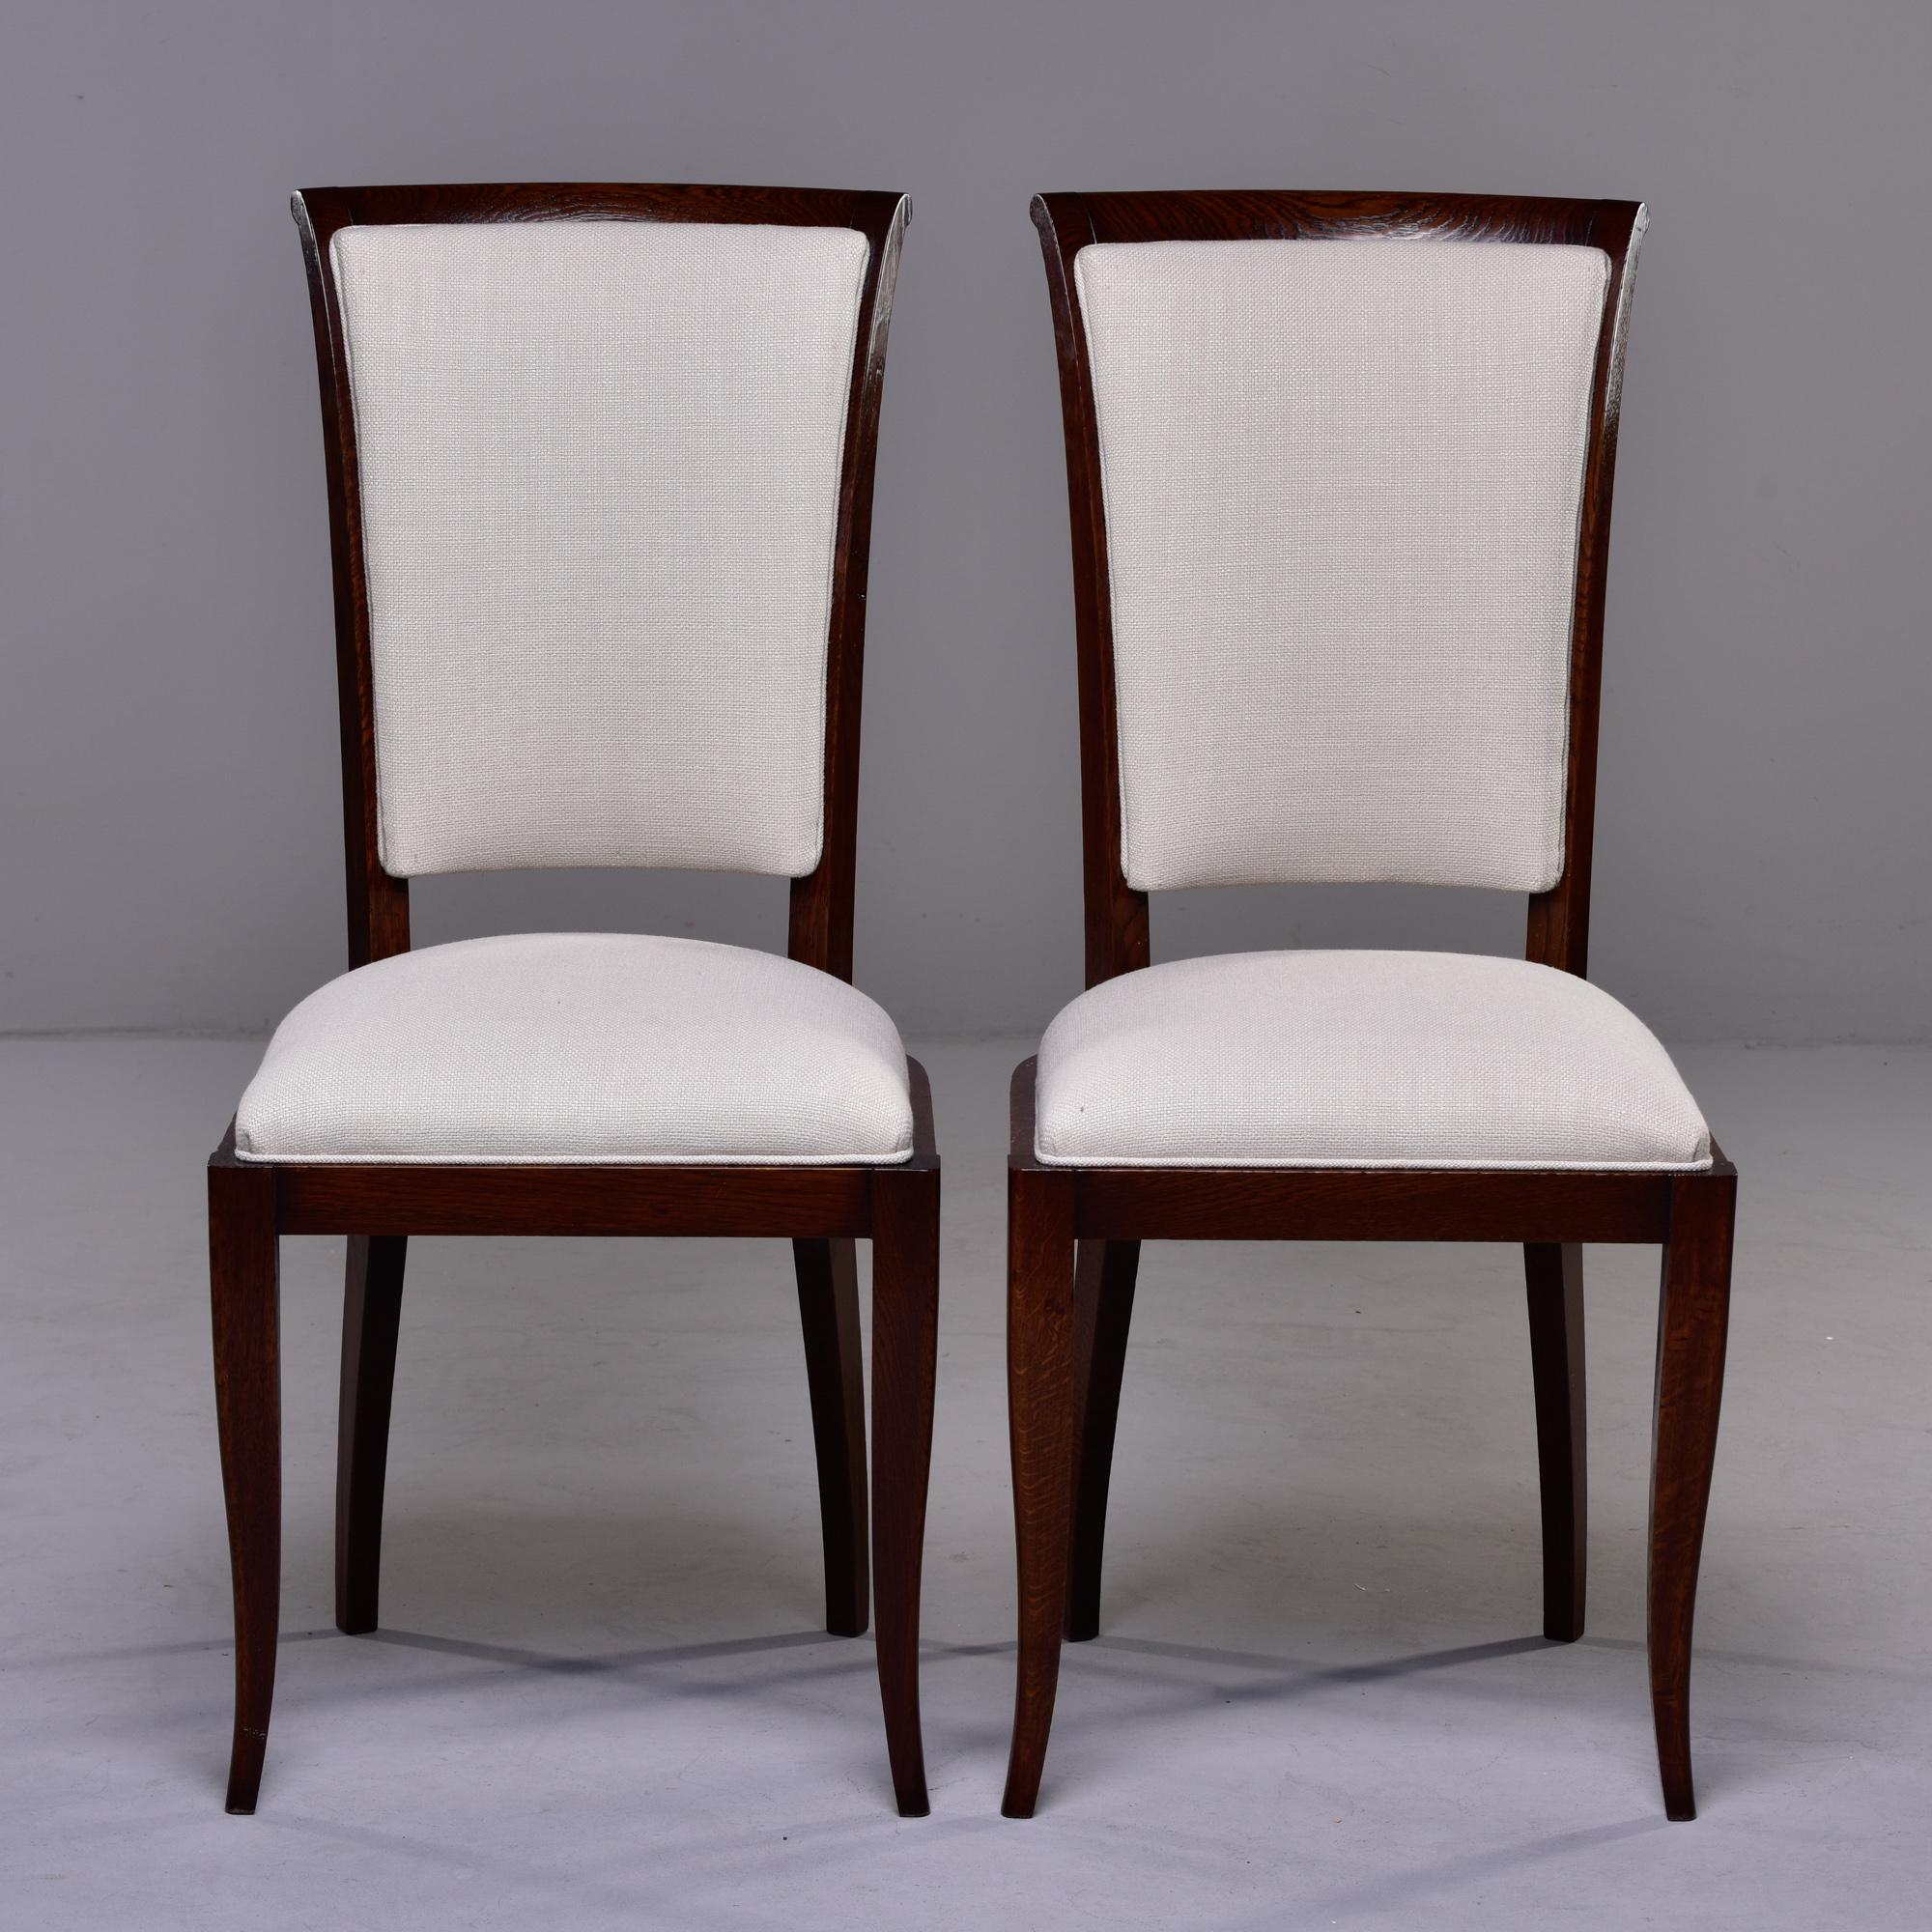 Circa 1950s set of French oak dining chairs with sleek profile, dark stain and upholstered seats and backs. Fabric is off-white linen blend dobby weave. Unknown maker. Sold and priced as a set of six. 

Measures: Seat height: 20” 
Seat width: